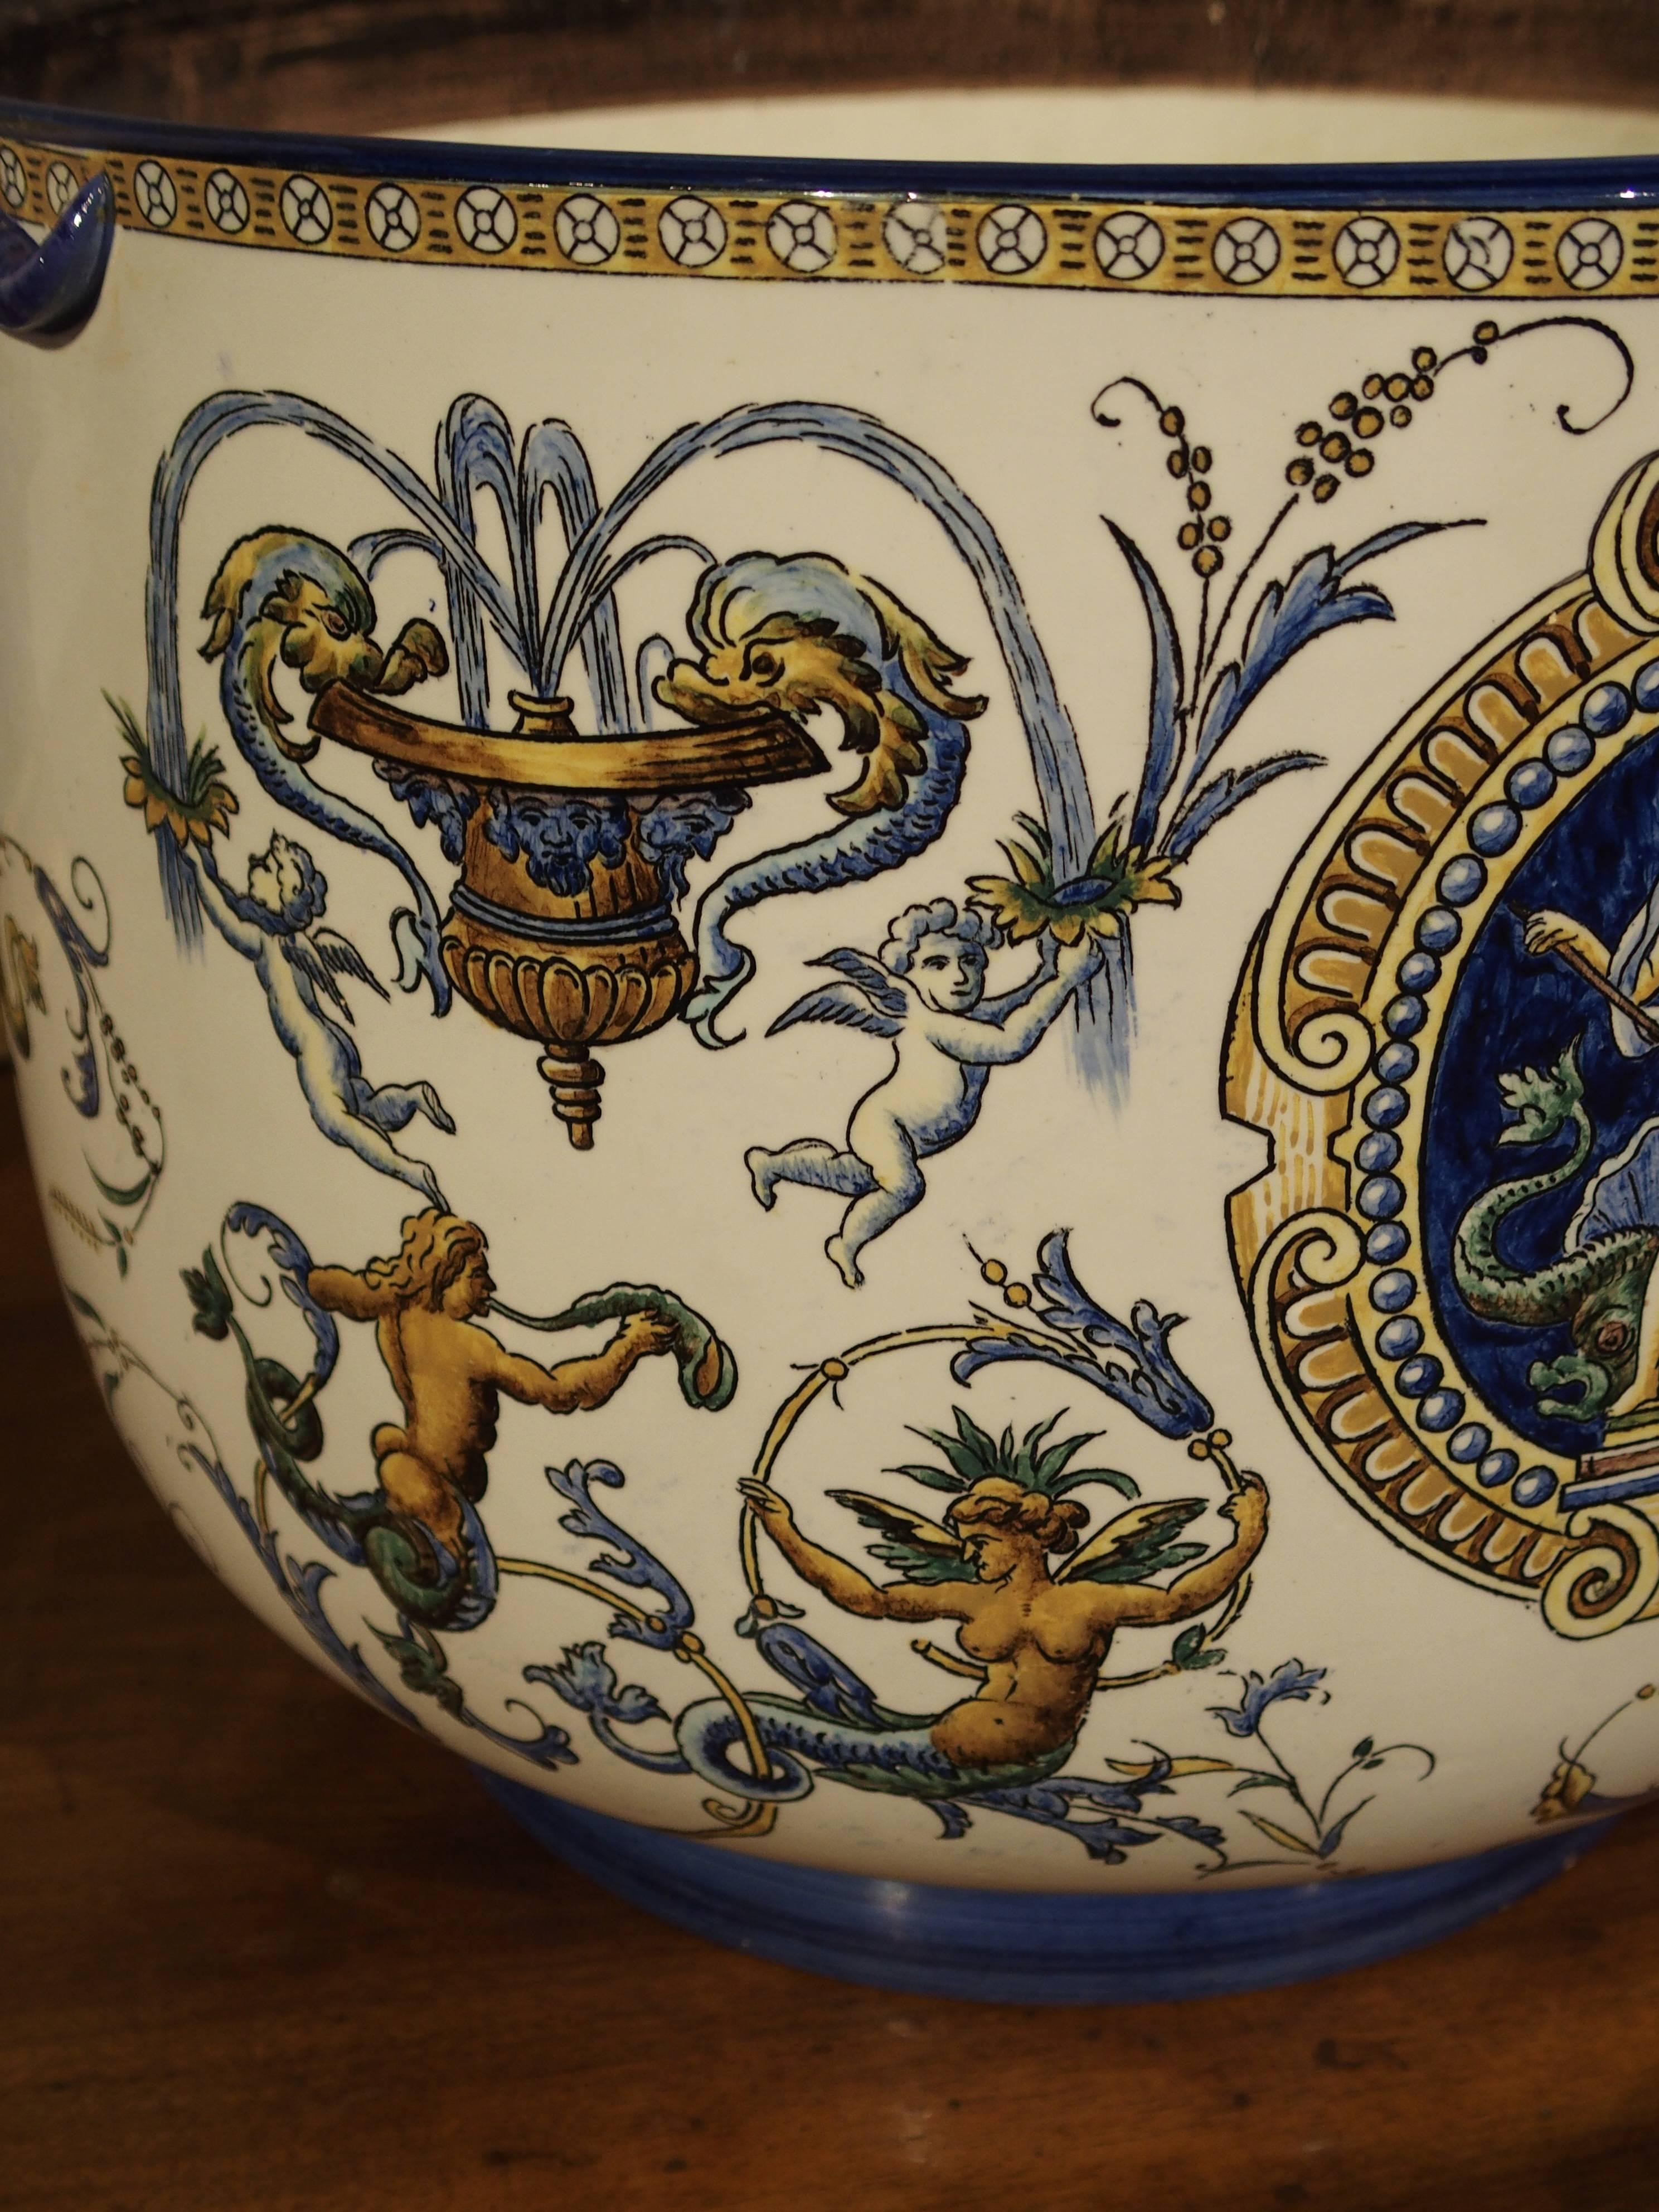 Triton.

This antique French faience jardiniere by Gien has the white ground color of a pattern called Renaissance, manufactured during the time period of 1860-1871. Faience is tin glazed earthenware that allows pigments to be applied in numerous